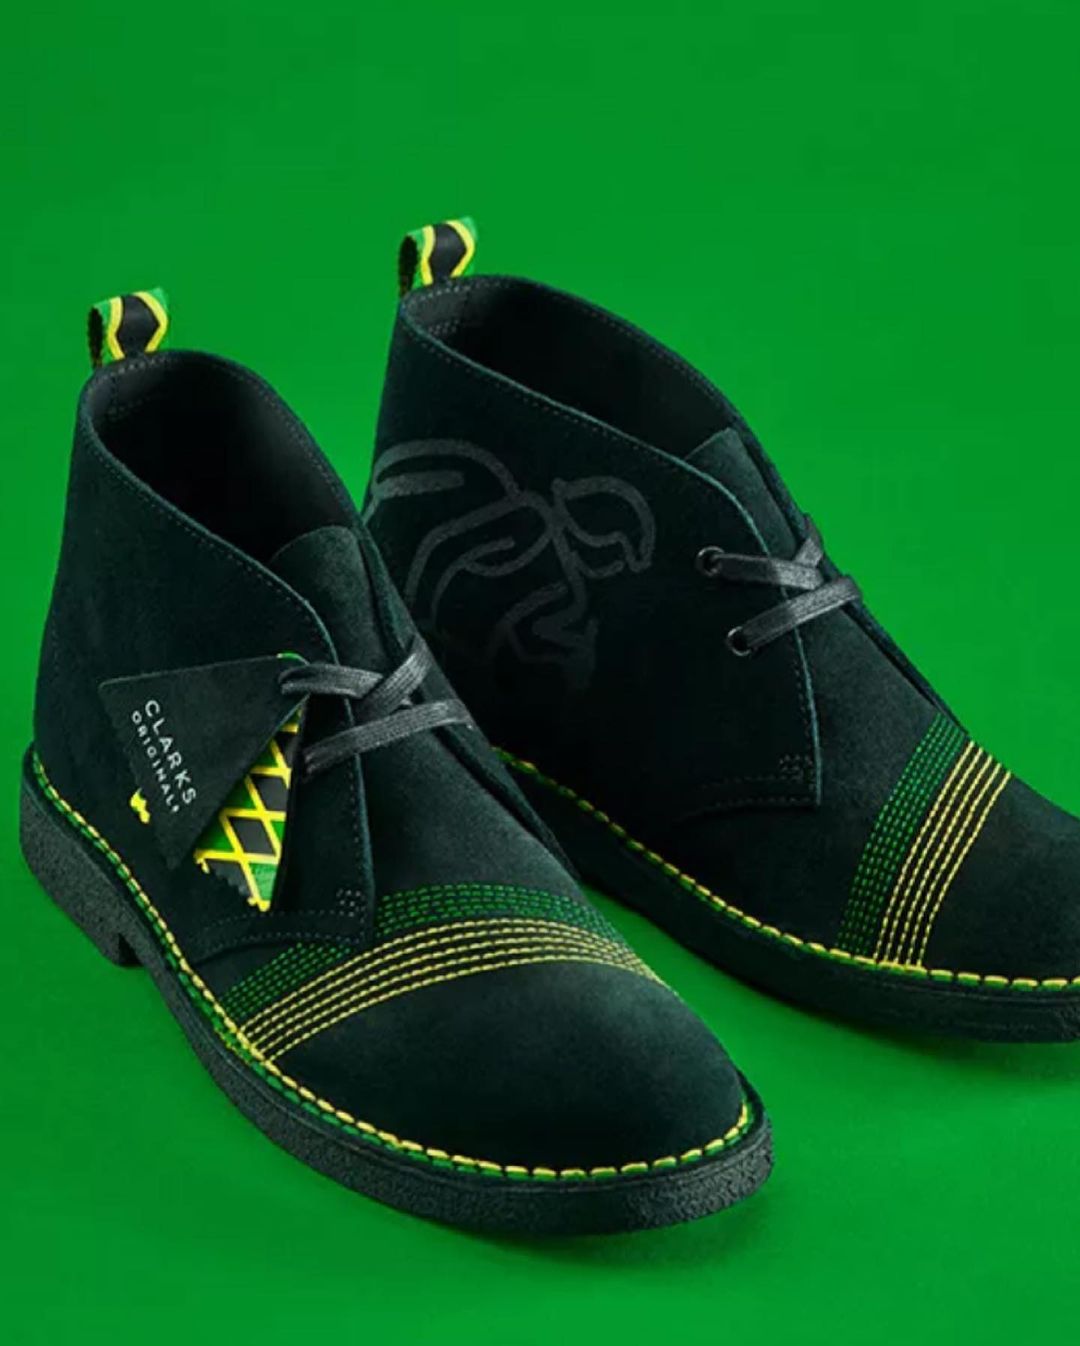 CLARKS ORIGINALS CELEBRATES JAMAICA IN NEW ICONIC RE-MAKES | THE BLUP